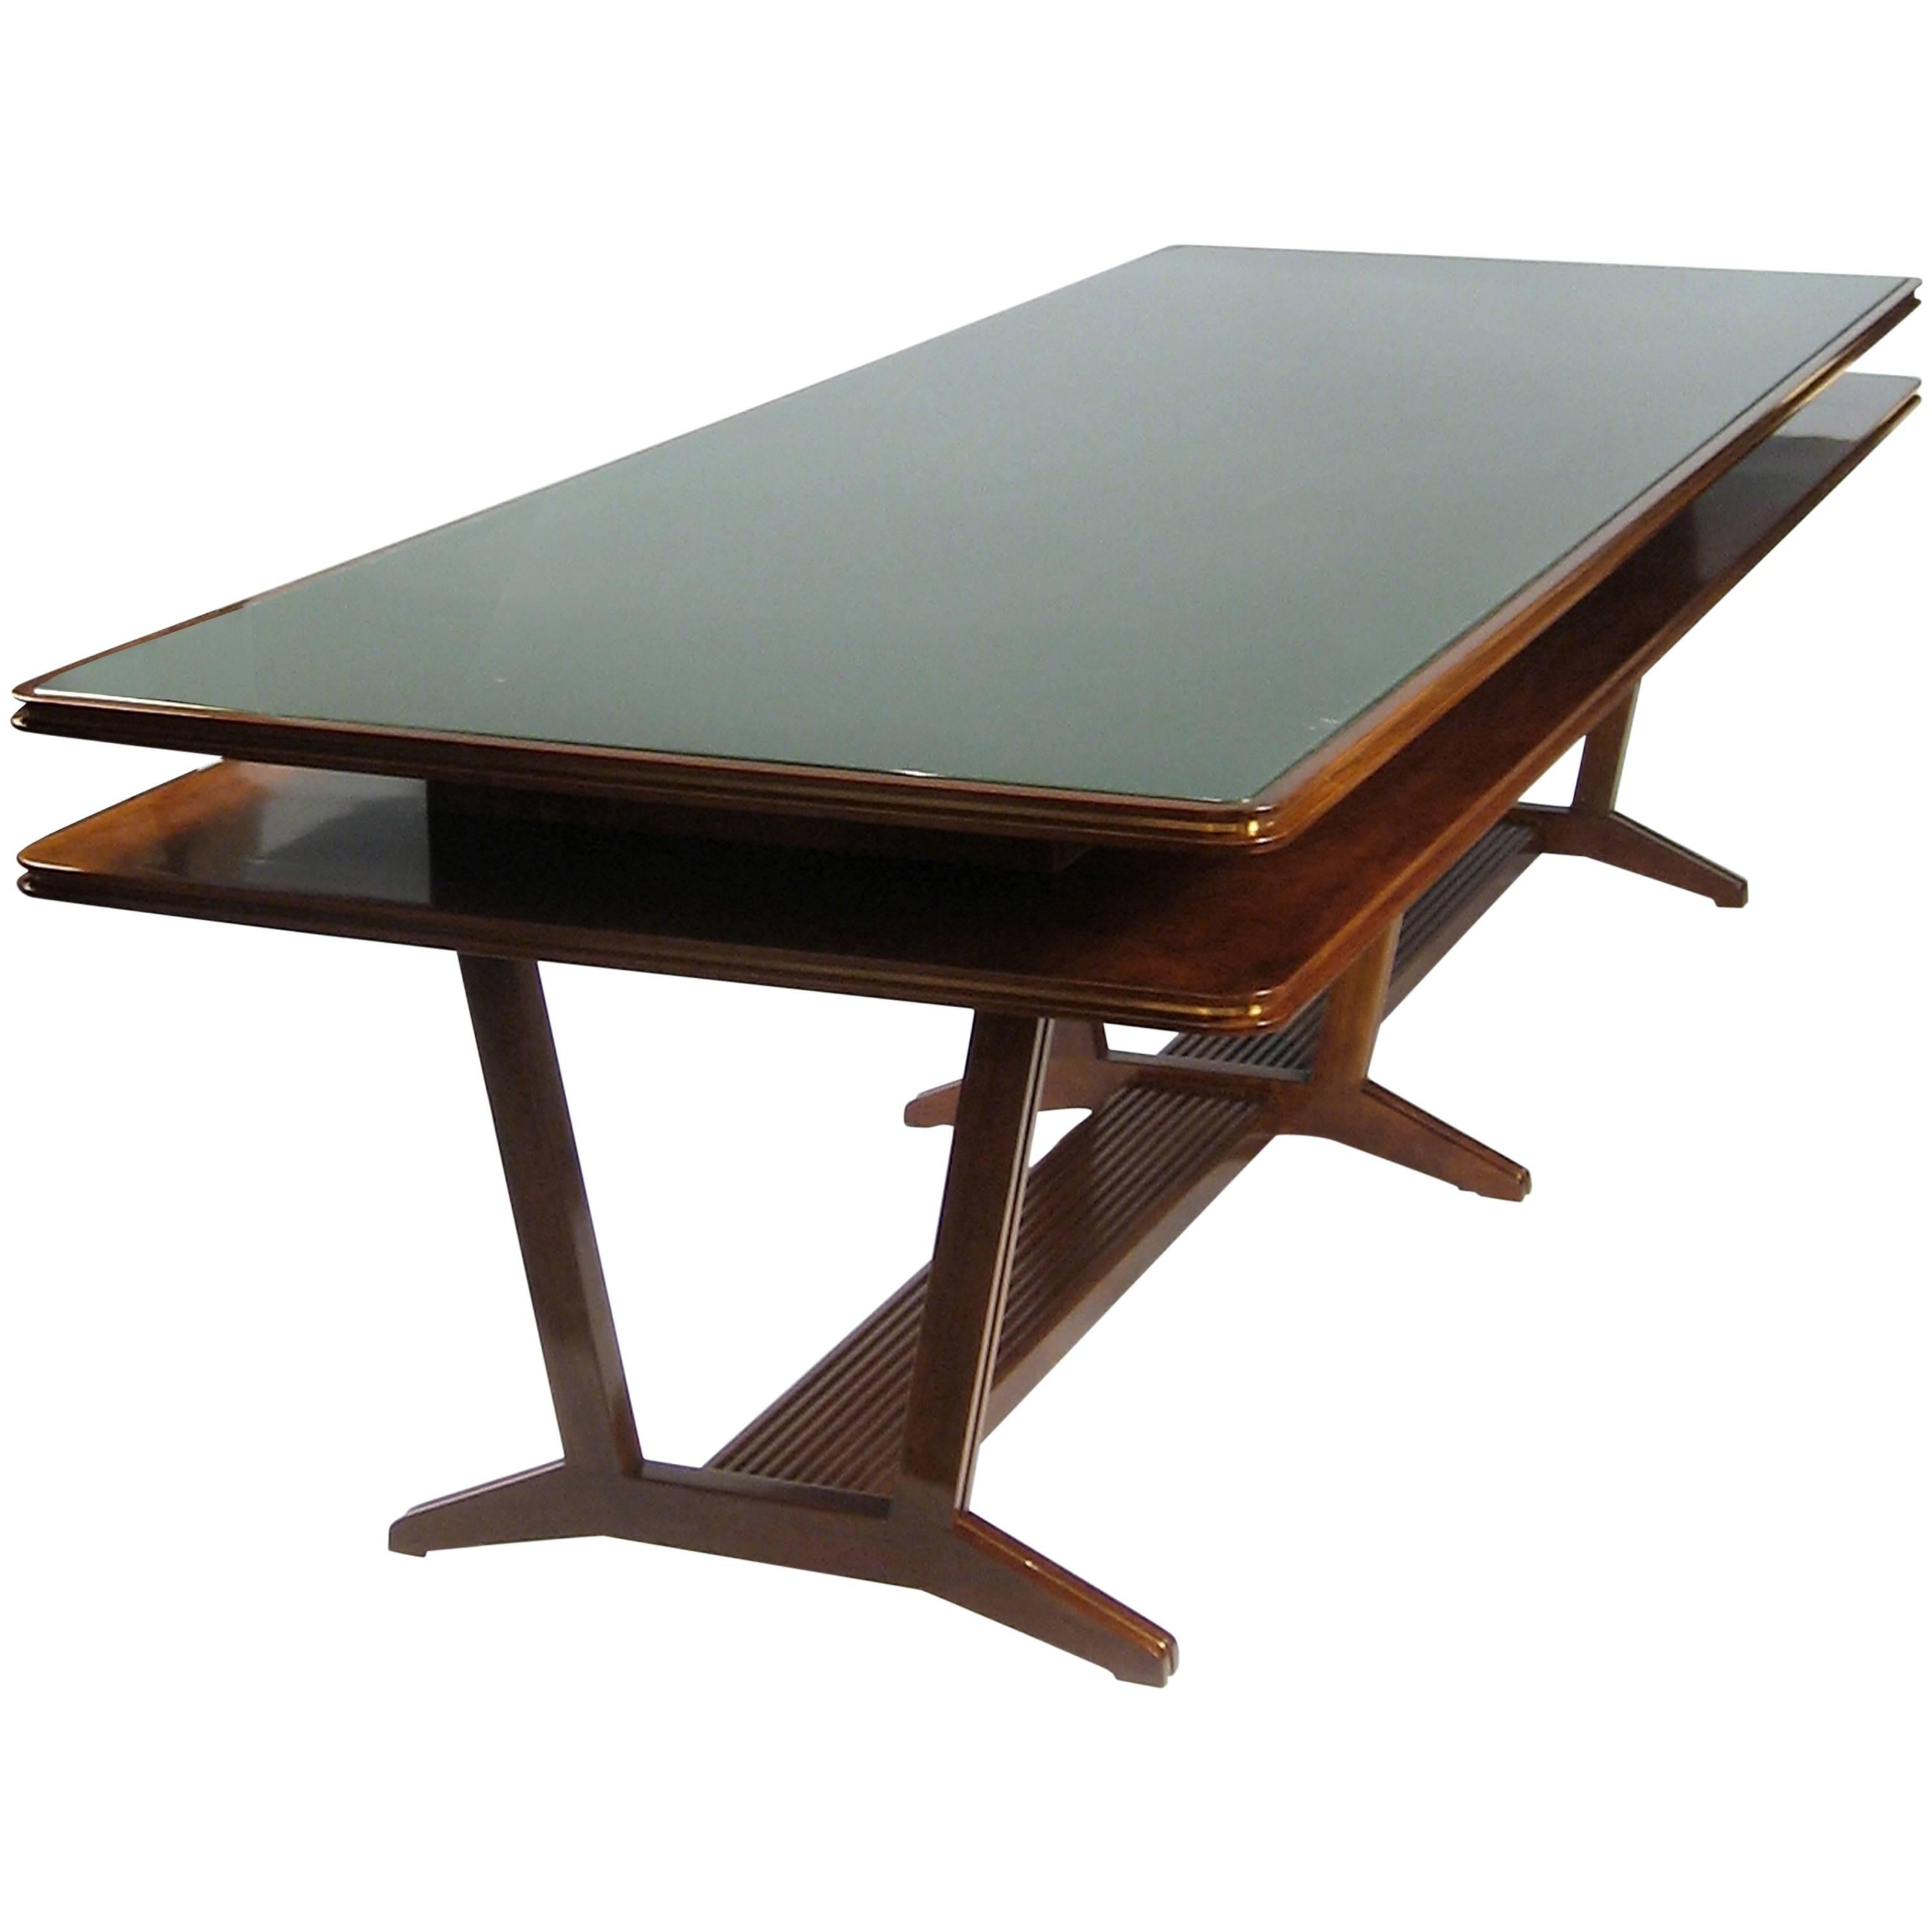 Two-Tier Library or Conference Table, Italy, Art Moderne, circa 1940